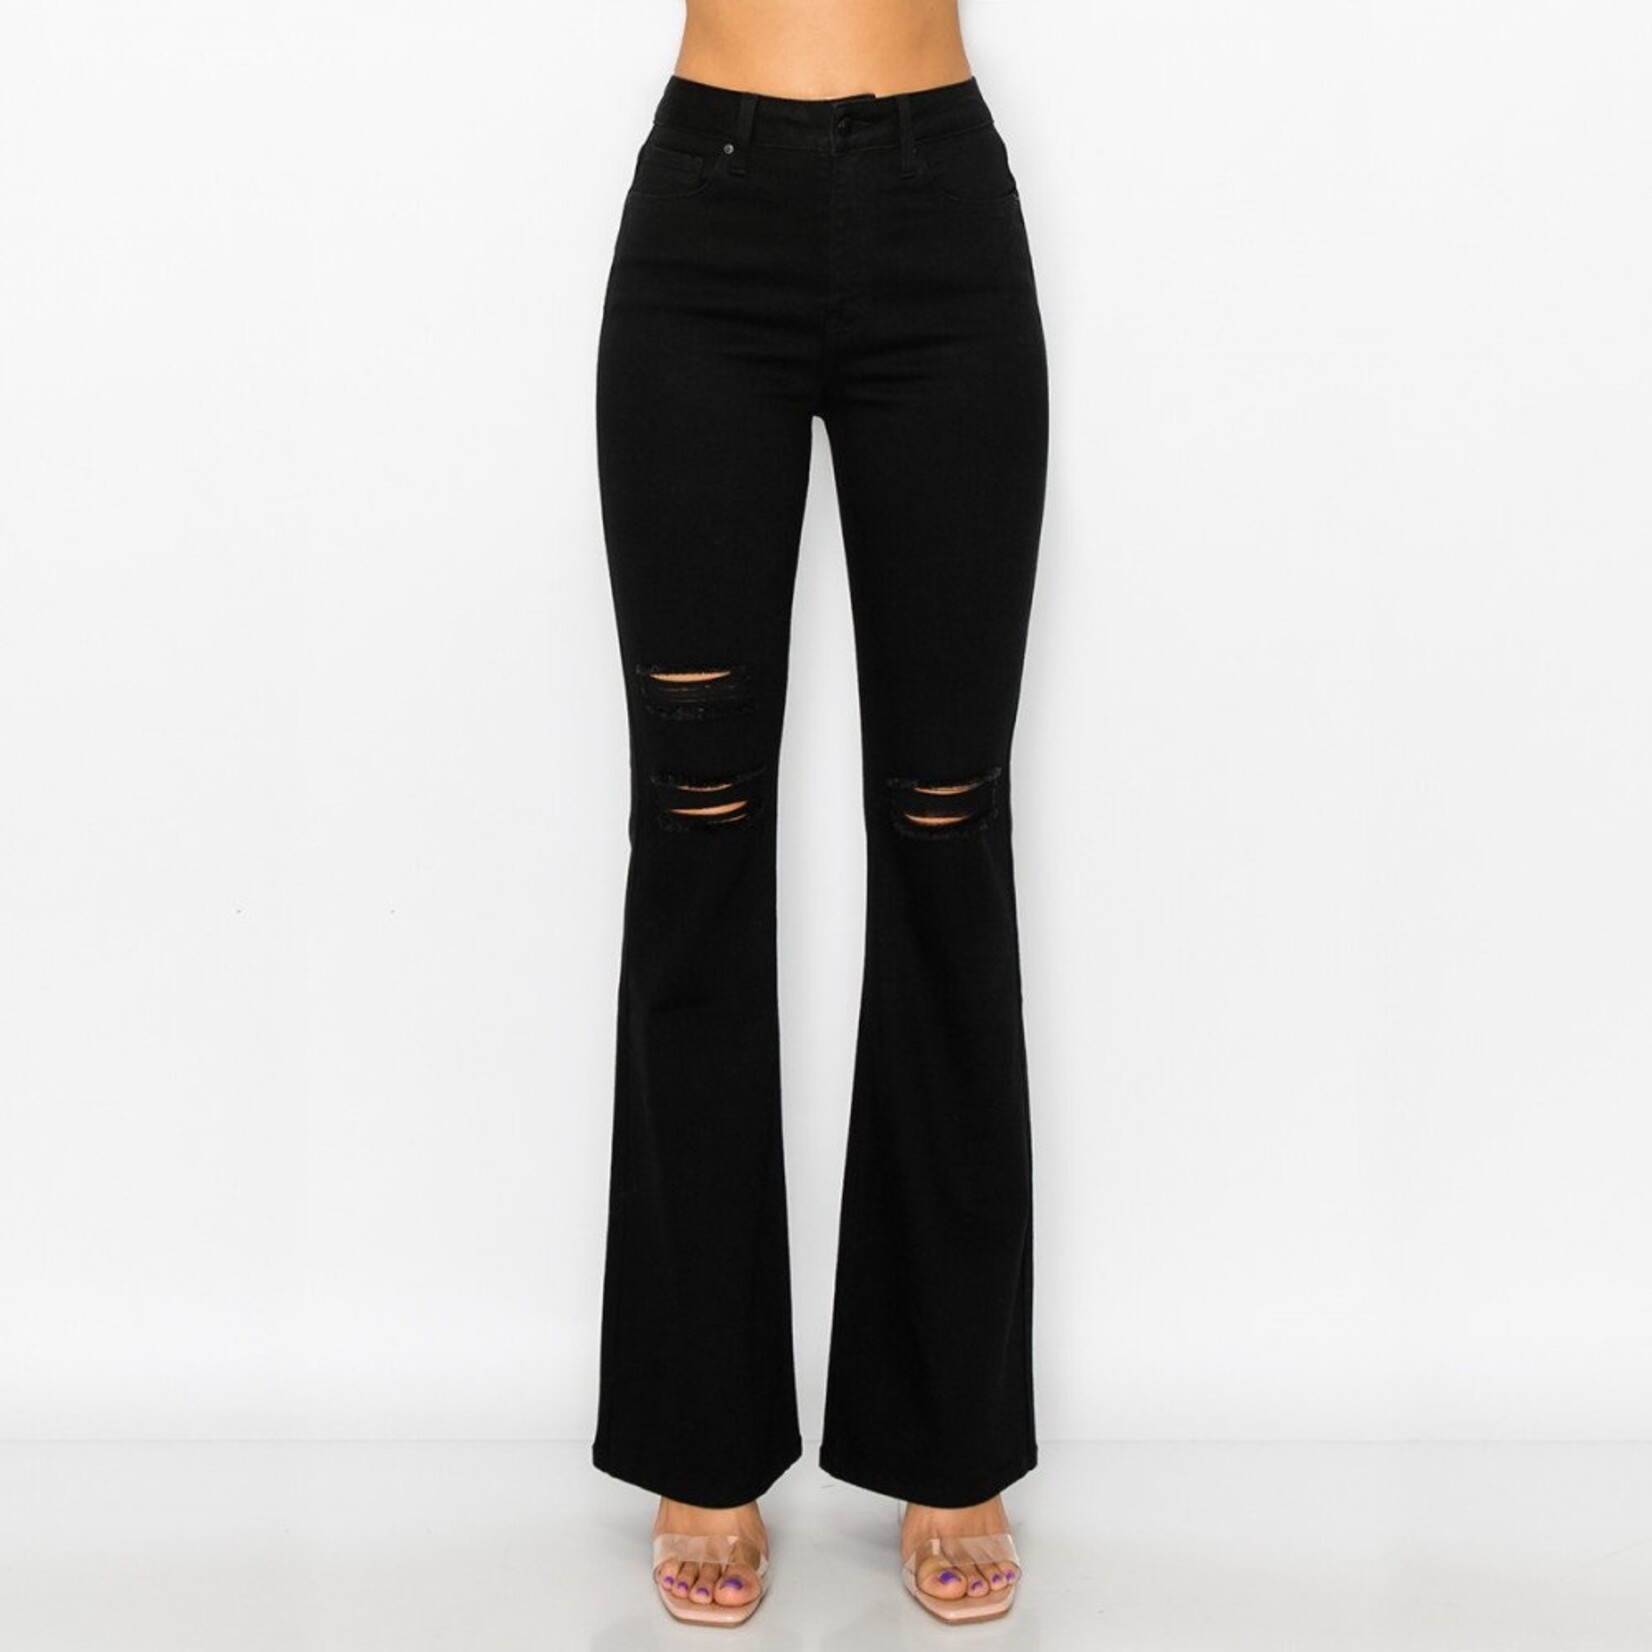 Wax Jeans WAX JEANS FLARE STYLE 90261